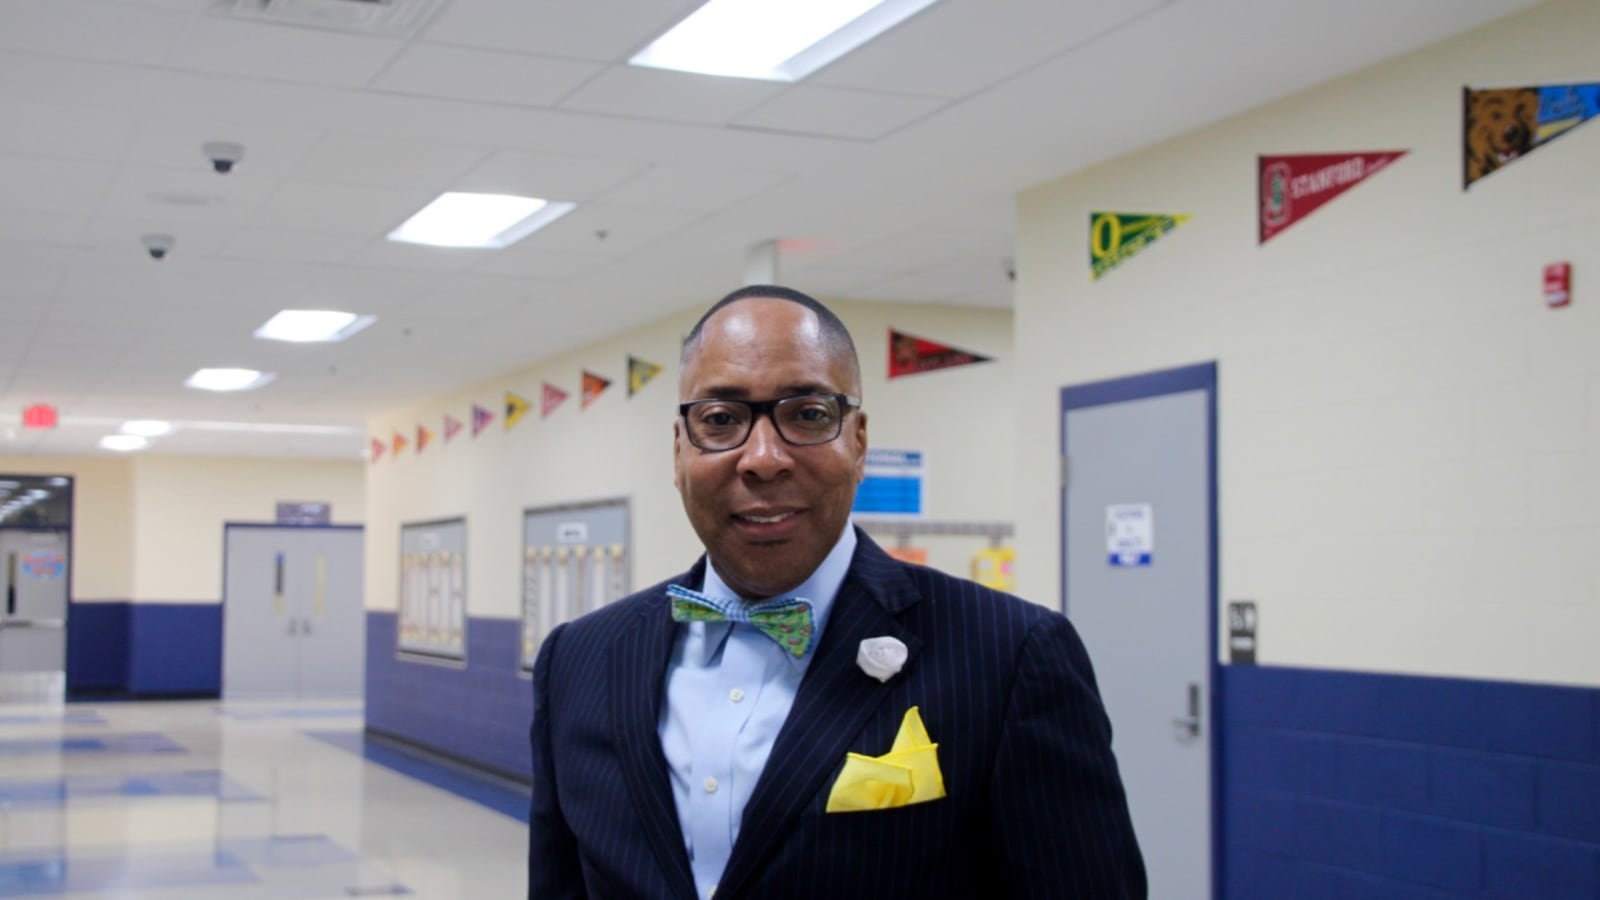 Rodney Rowan, a go-to principal with a track record of success, was tapped to shepherd the rebooted Westhaven Elementary School in Memphis.